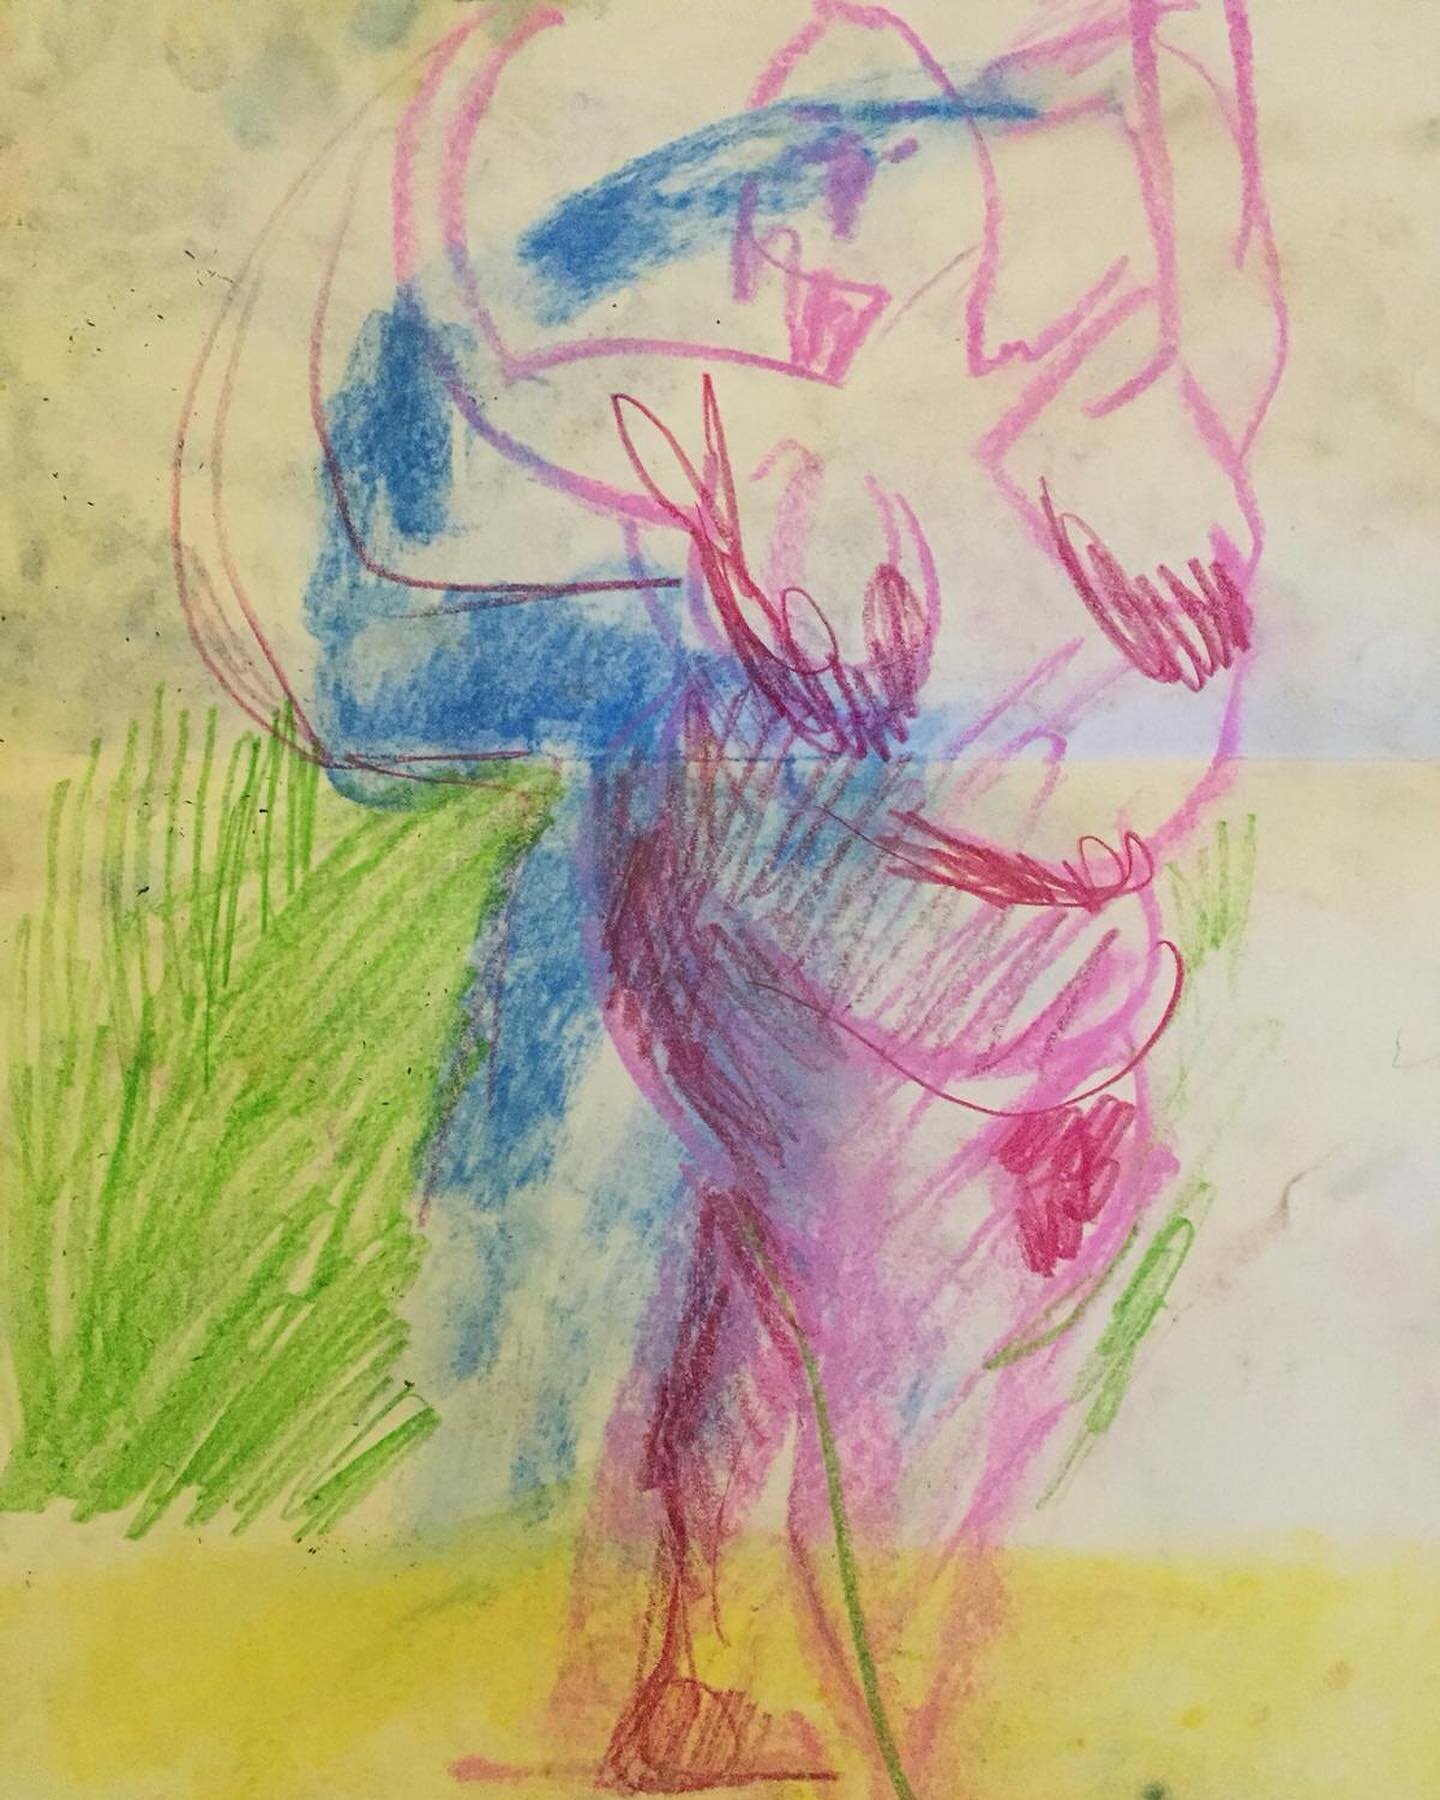 Another brilliant pastel by @allegra.fitz of @jigglechick87 

#model #artist #drawing #life #lifedrawing #lockdown #london #online #zoom #quarantine #pose #lines #art